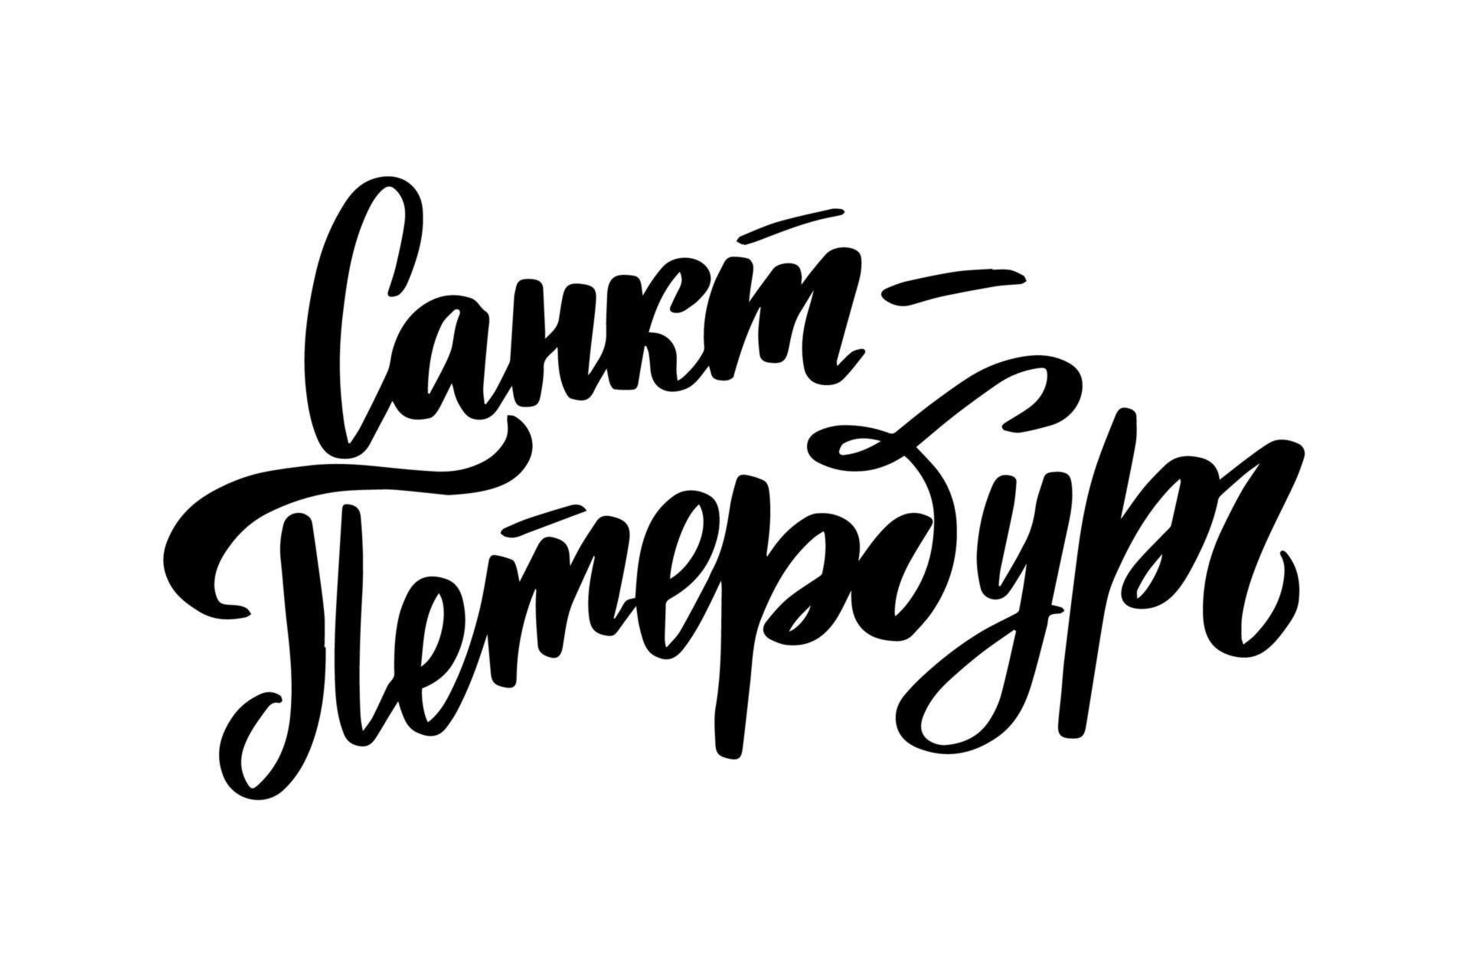 Hand drawn lettering in Russian. St. Petersburg city vector